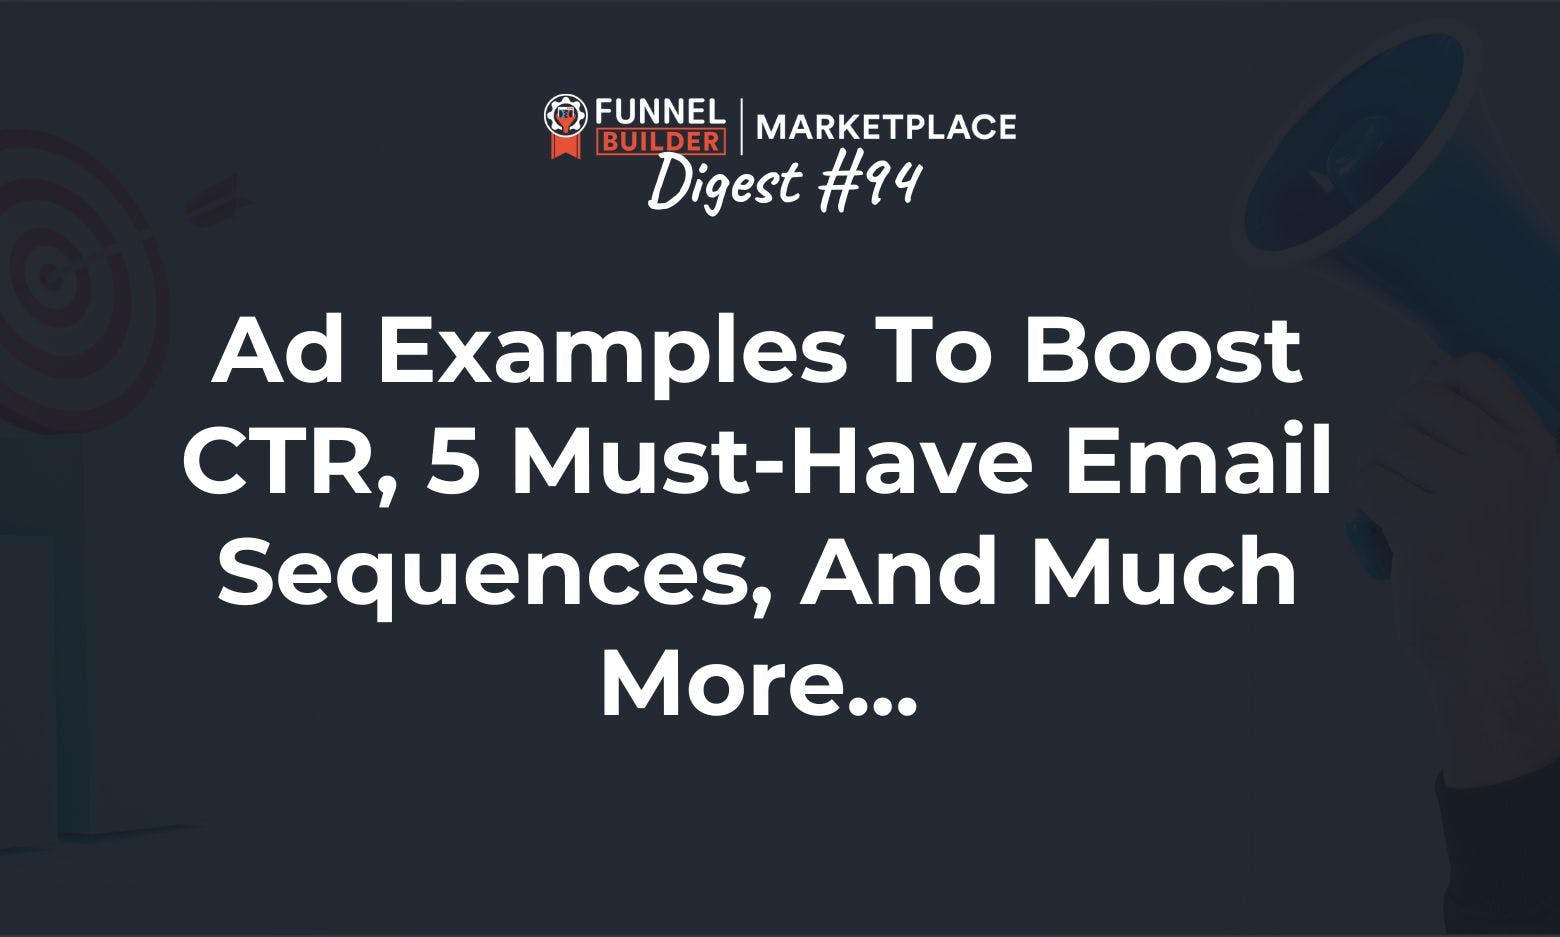 FBM Digest #94: Ad examples to boost CTR, 5 must-have email sequences, and much more...